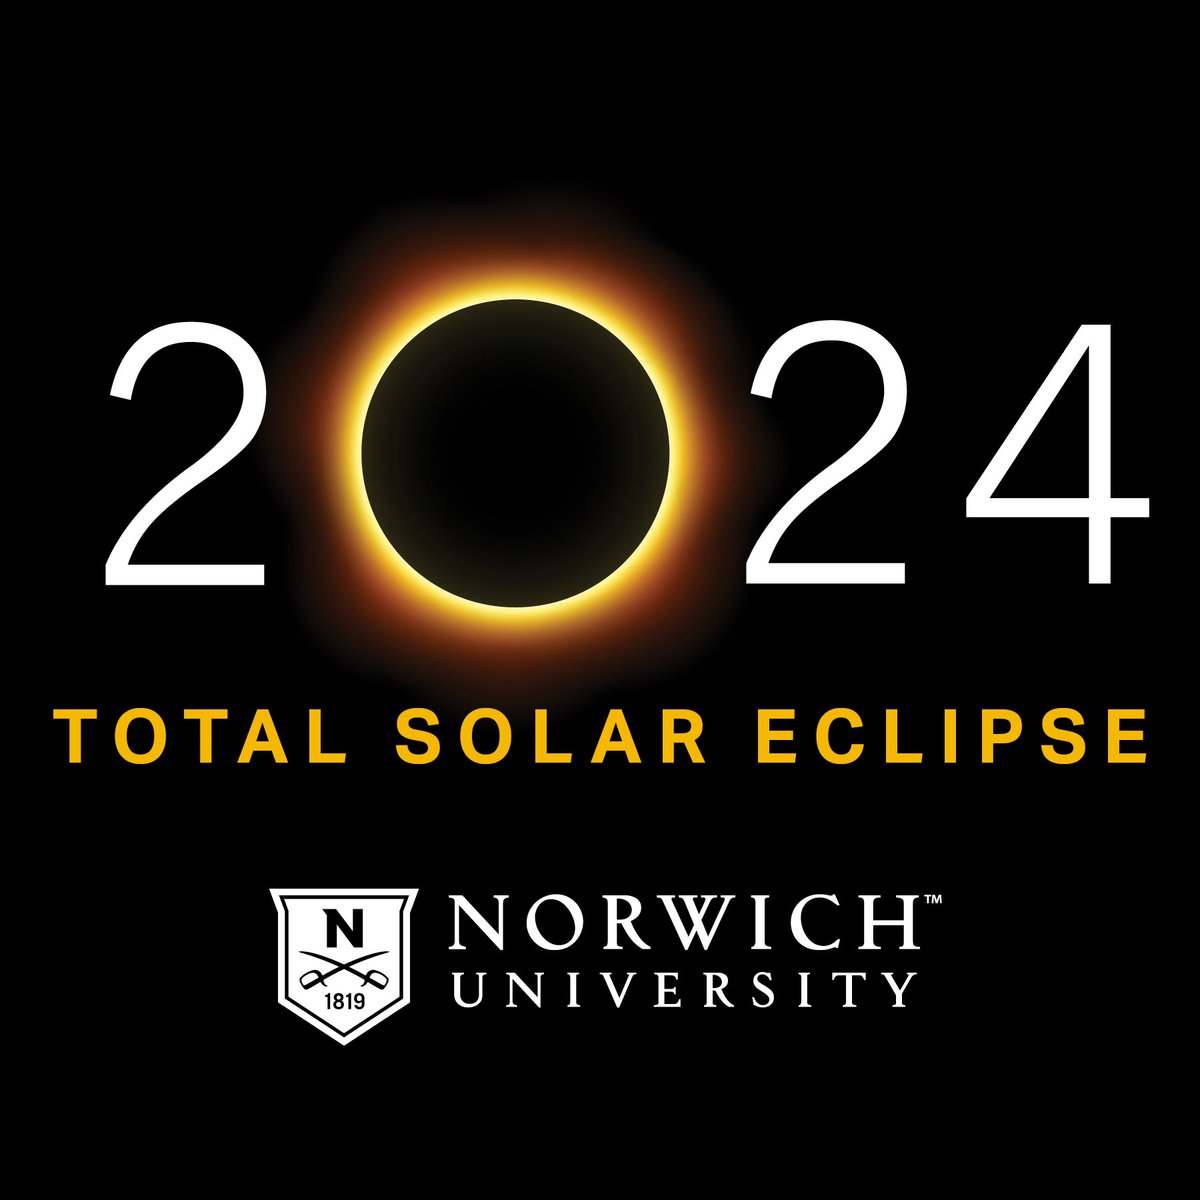 Tomorrow we'll be at Norwich University's Softball Field for the 2024 North American Solar Eclipse! And don't worry about the glasses, we've got you covered! Set your watches for 2:14 PM, you won't want to miss when the sun completely vanishes at 3:26 PM!